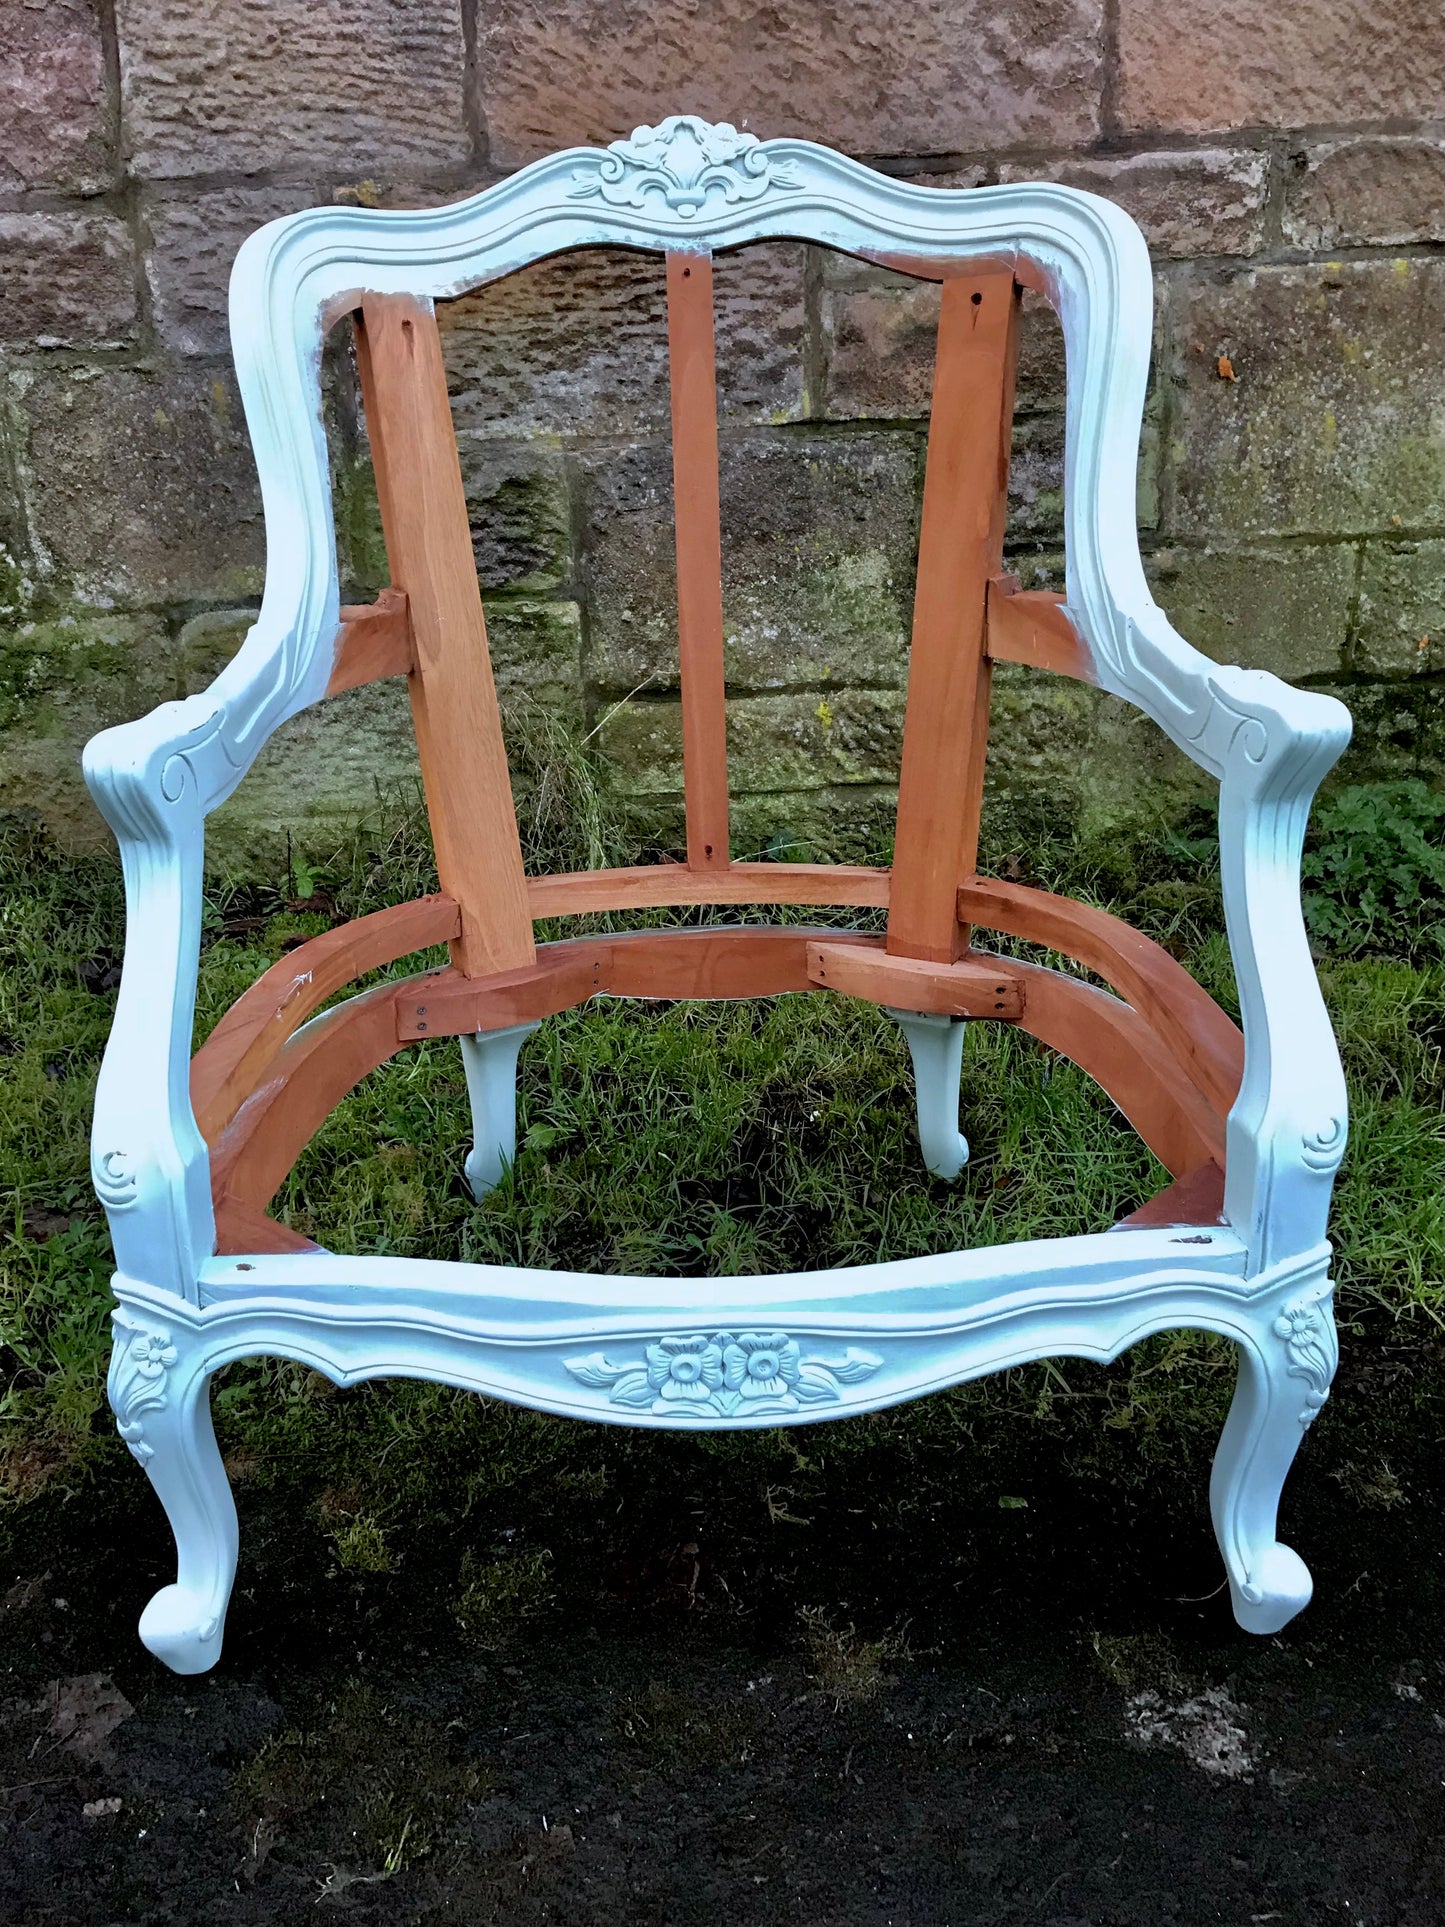 New Reproduction carved traditional mahogany armchair available for reupholstery and painting your choice of colour